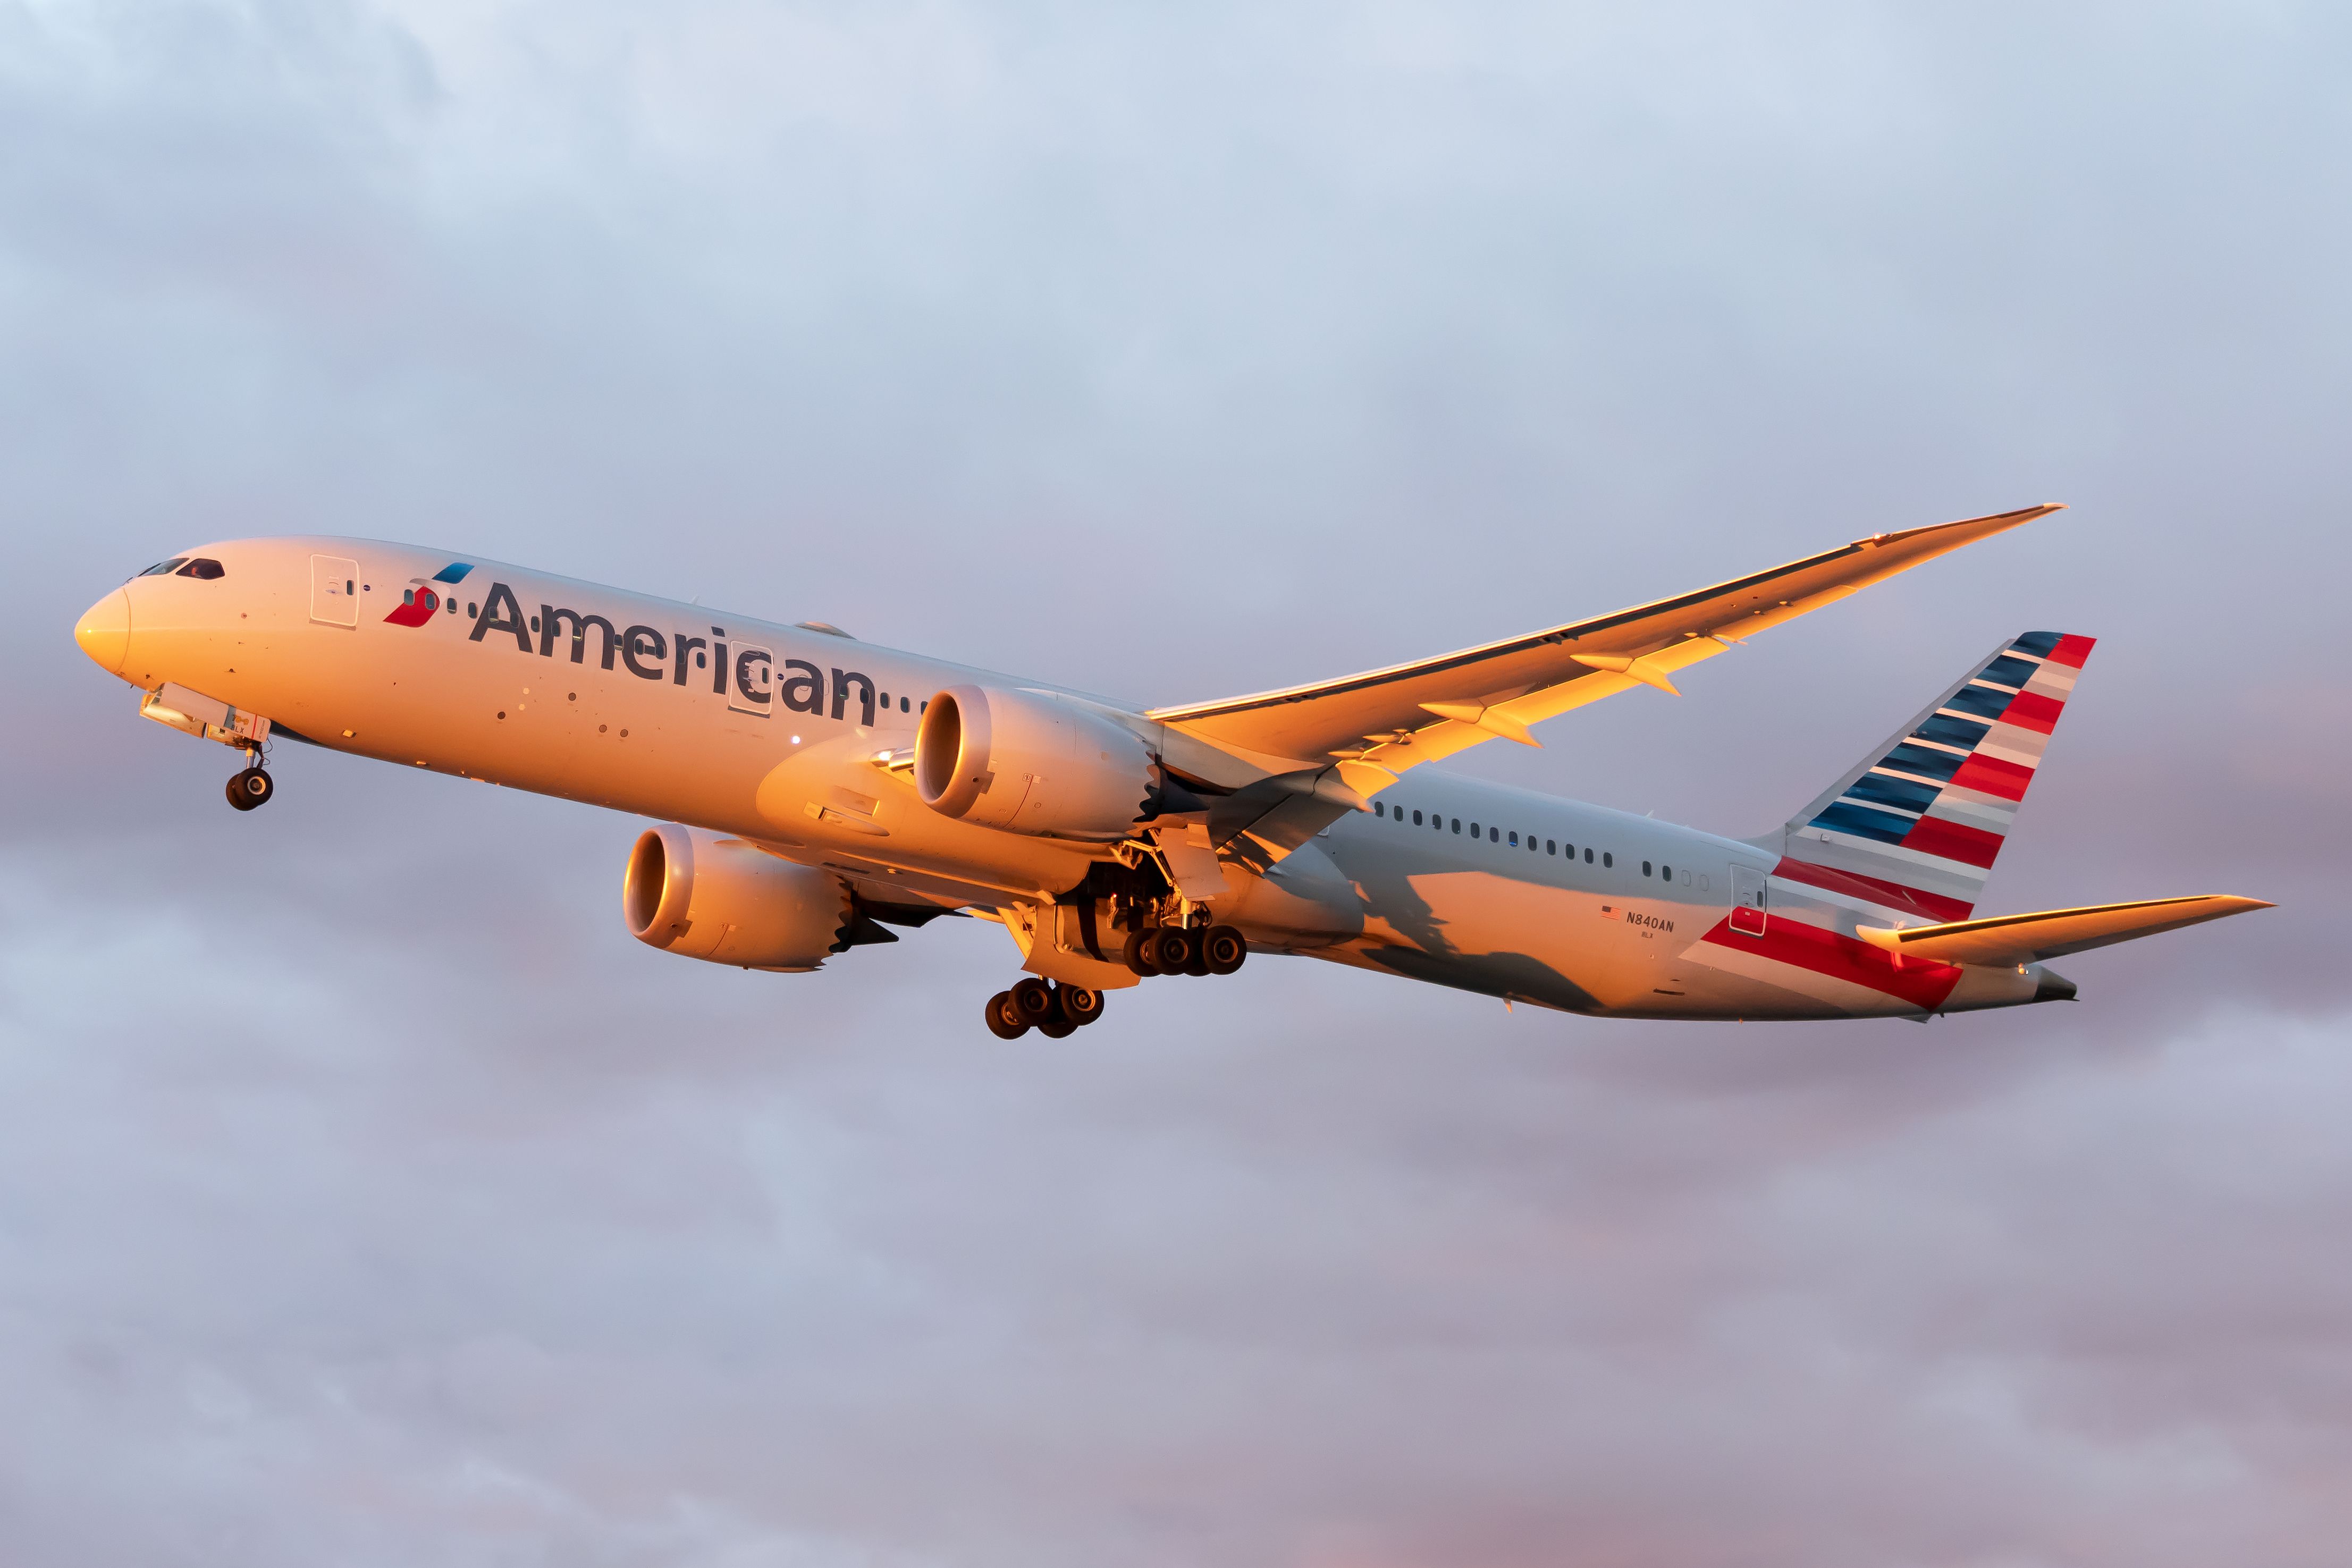 An American Airlines Boeing 787-9 Dreamliner flying in the sky.